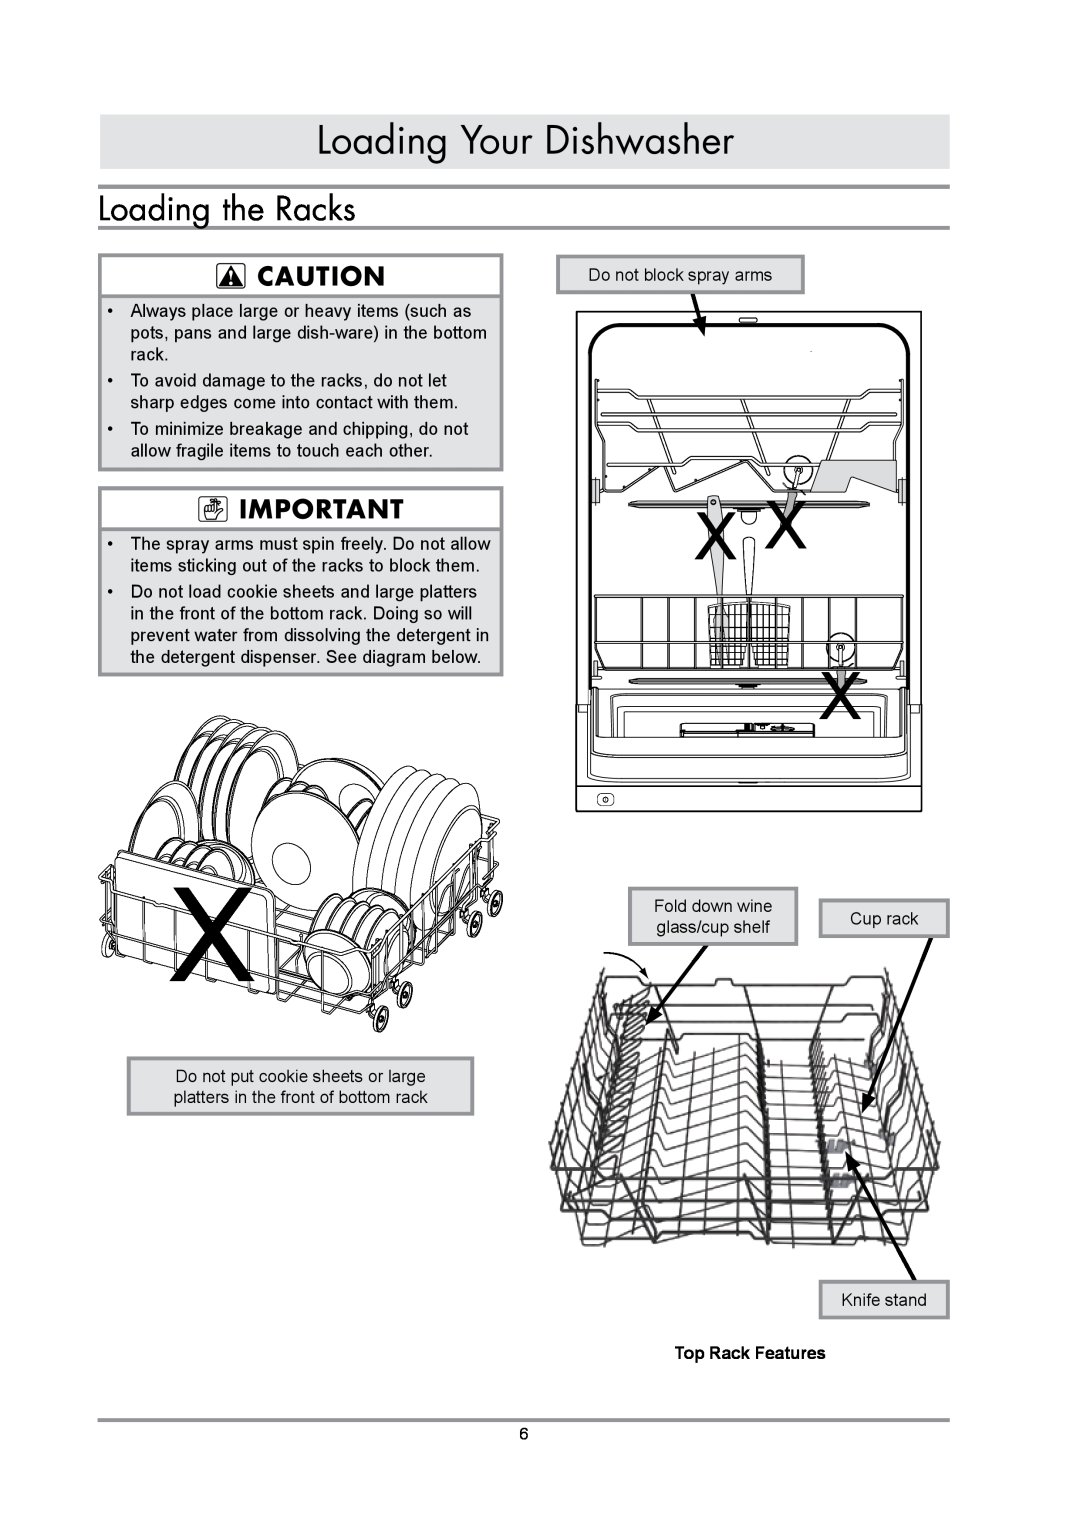 Dacor DDWF24S important safety instructions Loading the Racks, Top Rack Features, Loading Your Dishwasher 